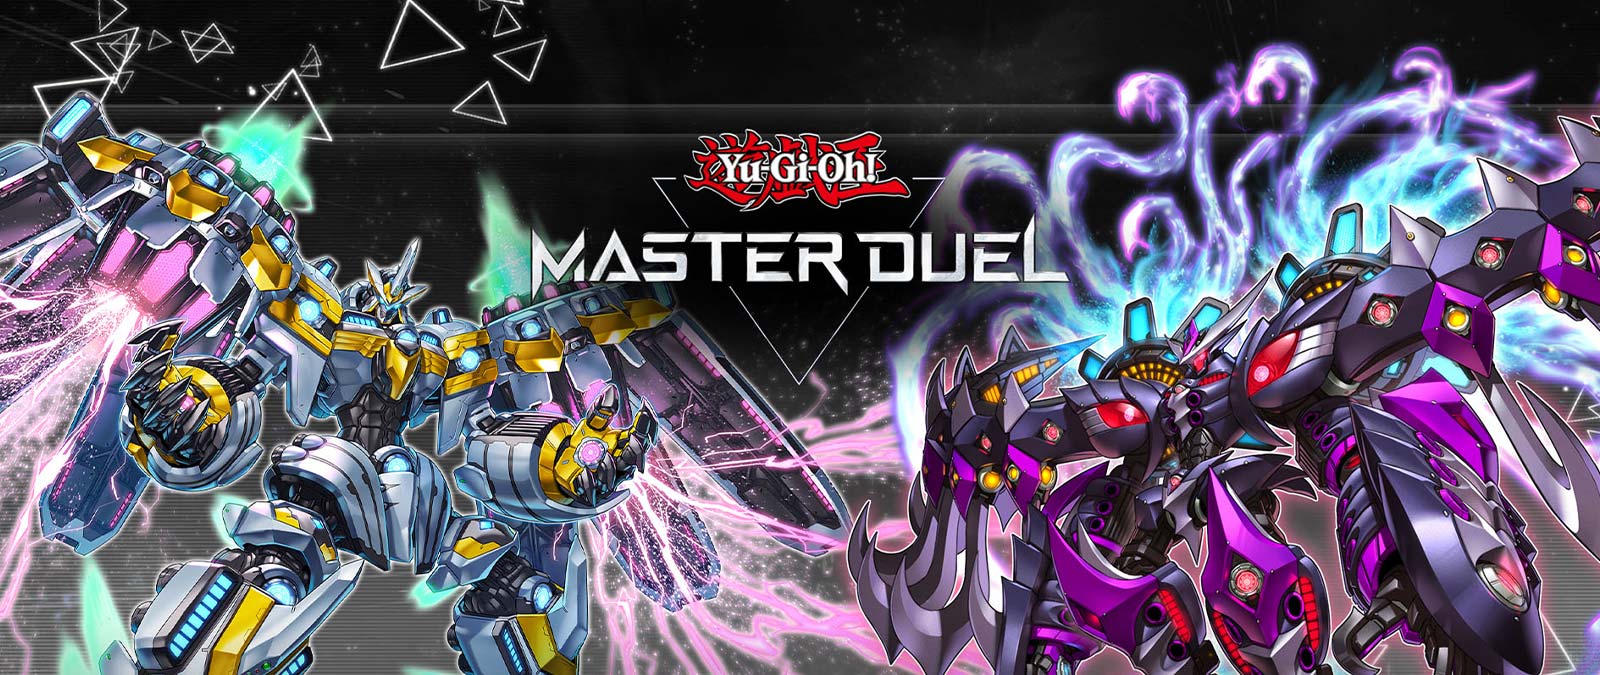 Yu-Gi-Oh! Master Duel, Typhon and Zeus posing side-by-side